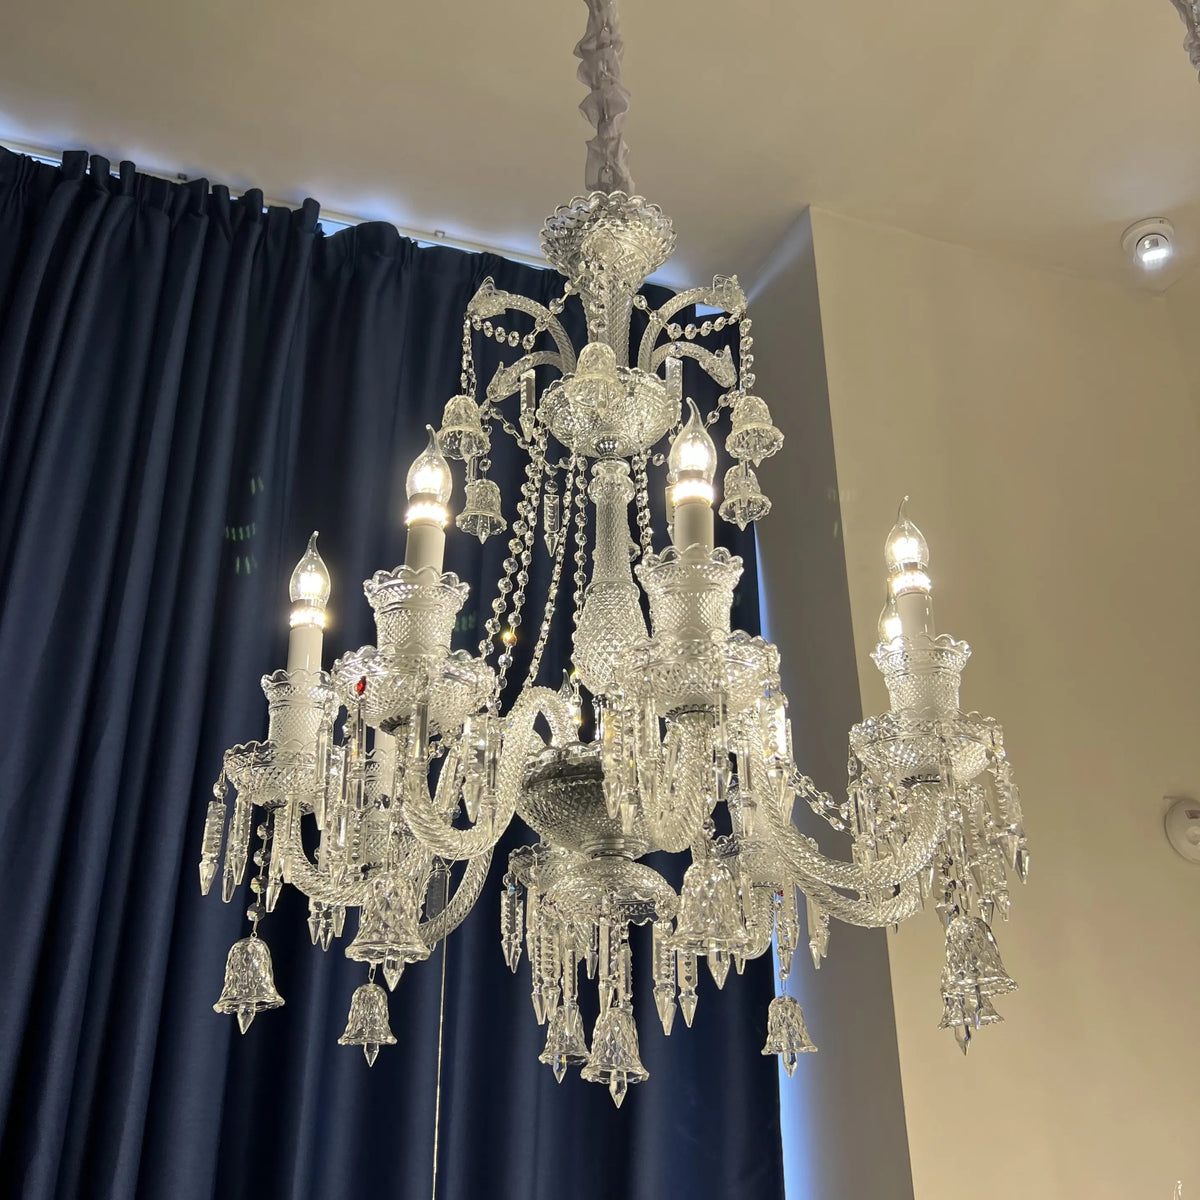 European-style Luxury CanMLe Blue/Clear Crystal Oversized Chandelier Art Branch Designer Foyer/Staircase Light Fixture